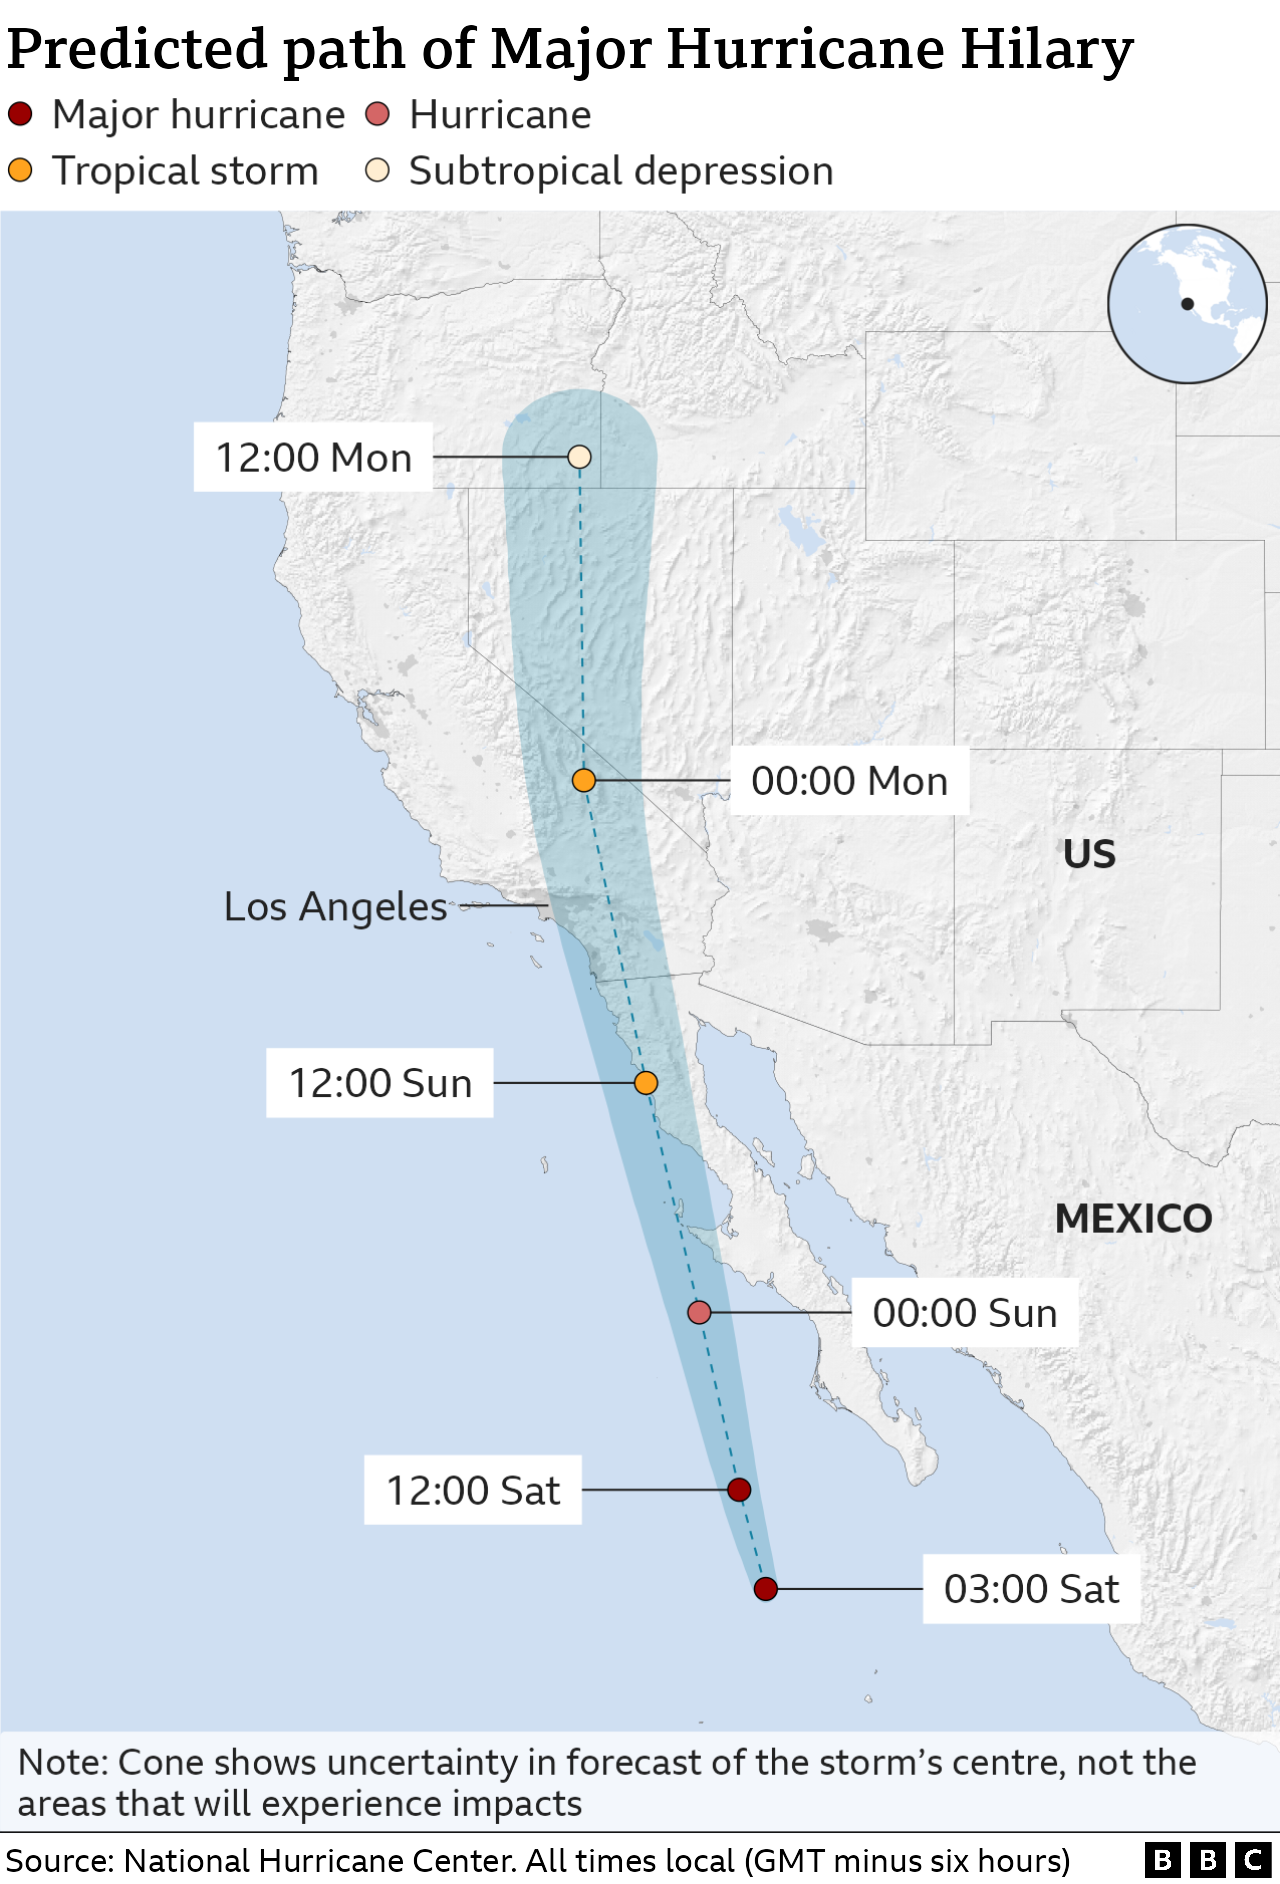 Map shows the predicted path of Hurricane Hilary from 03:00 Saturday, off the coast of Mexico, to 12:00 Monday, in California